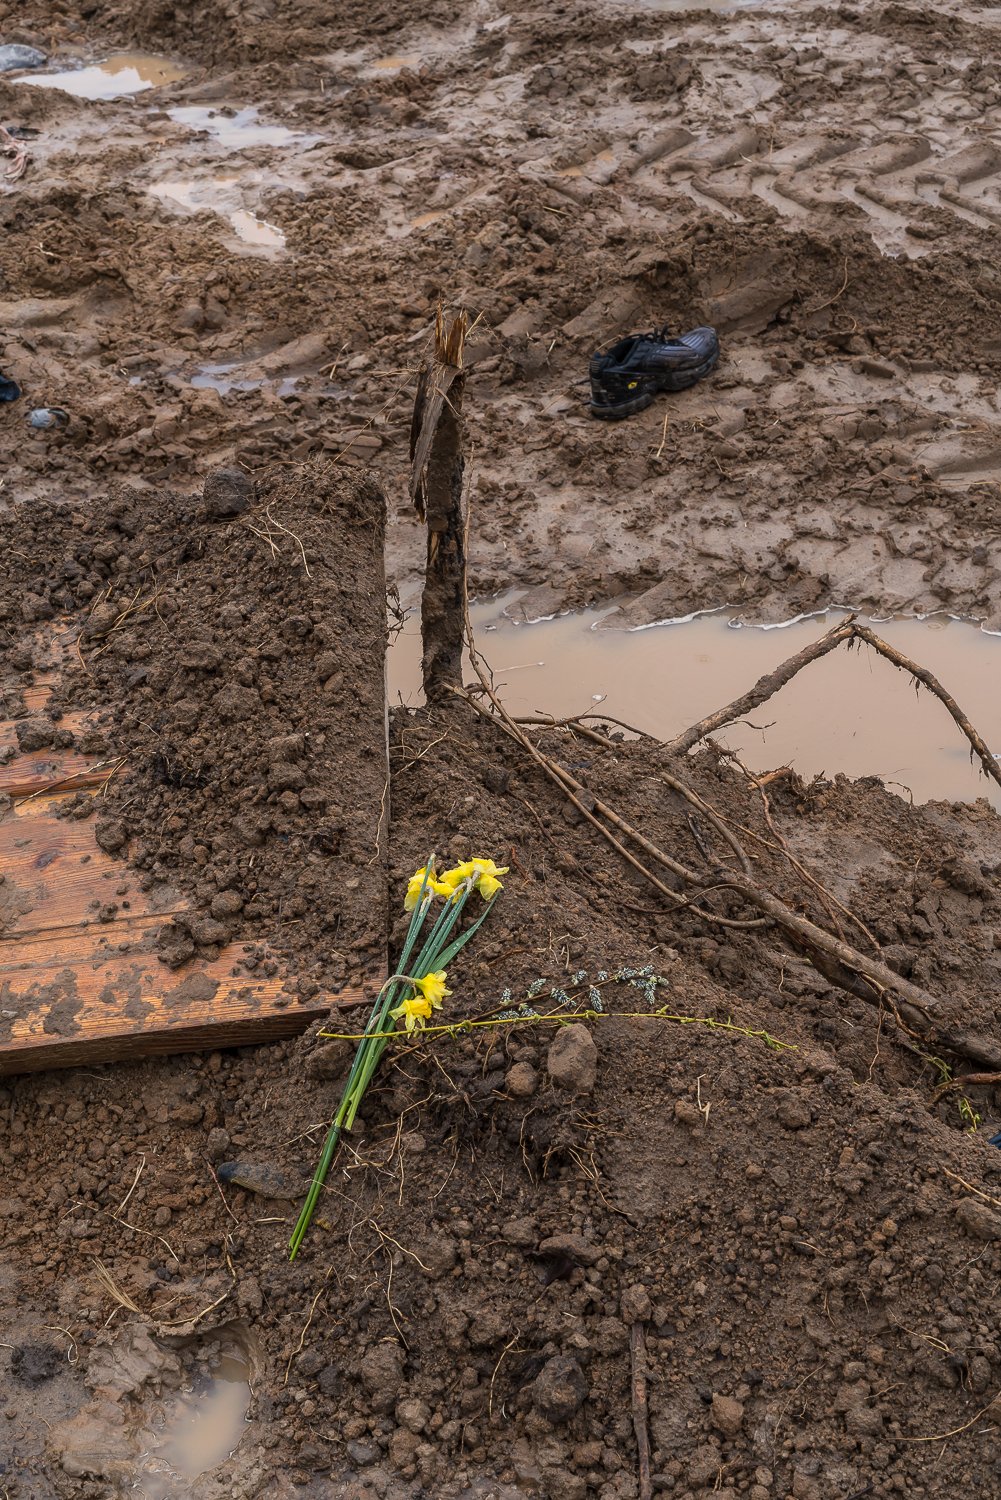  Flowers are left at the site of a former mass grave discovered after Russian troops left the city on Friday, April 22, 2022 in Bucha, Ukraine. 